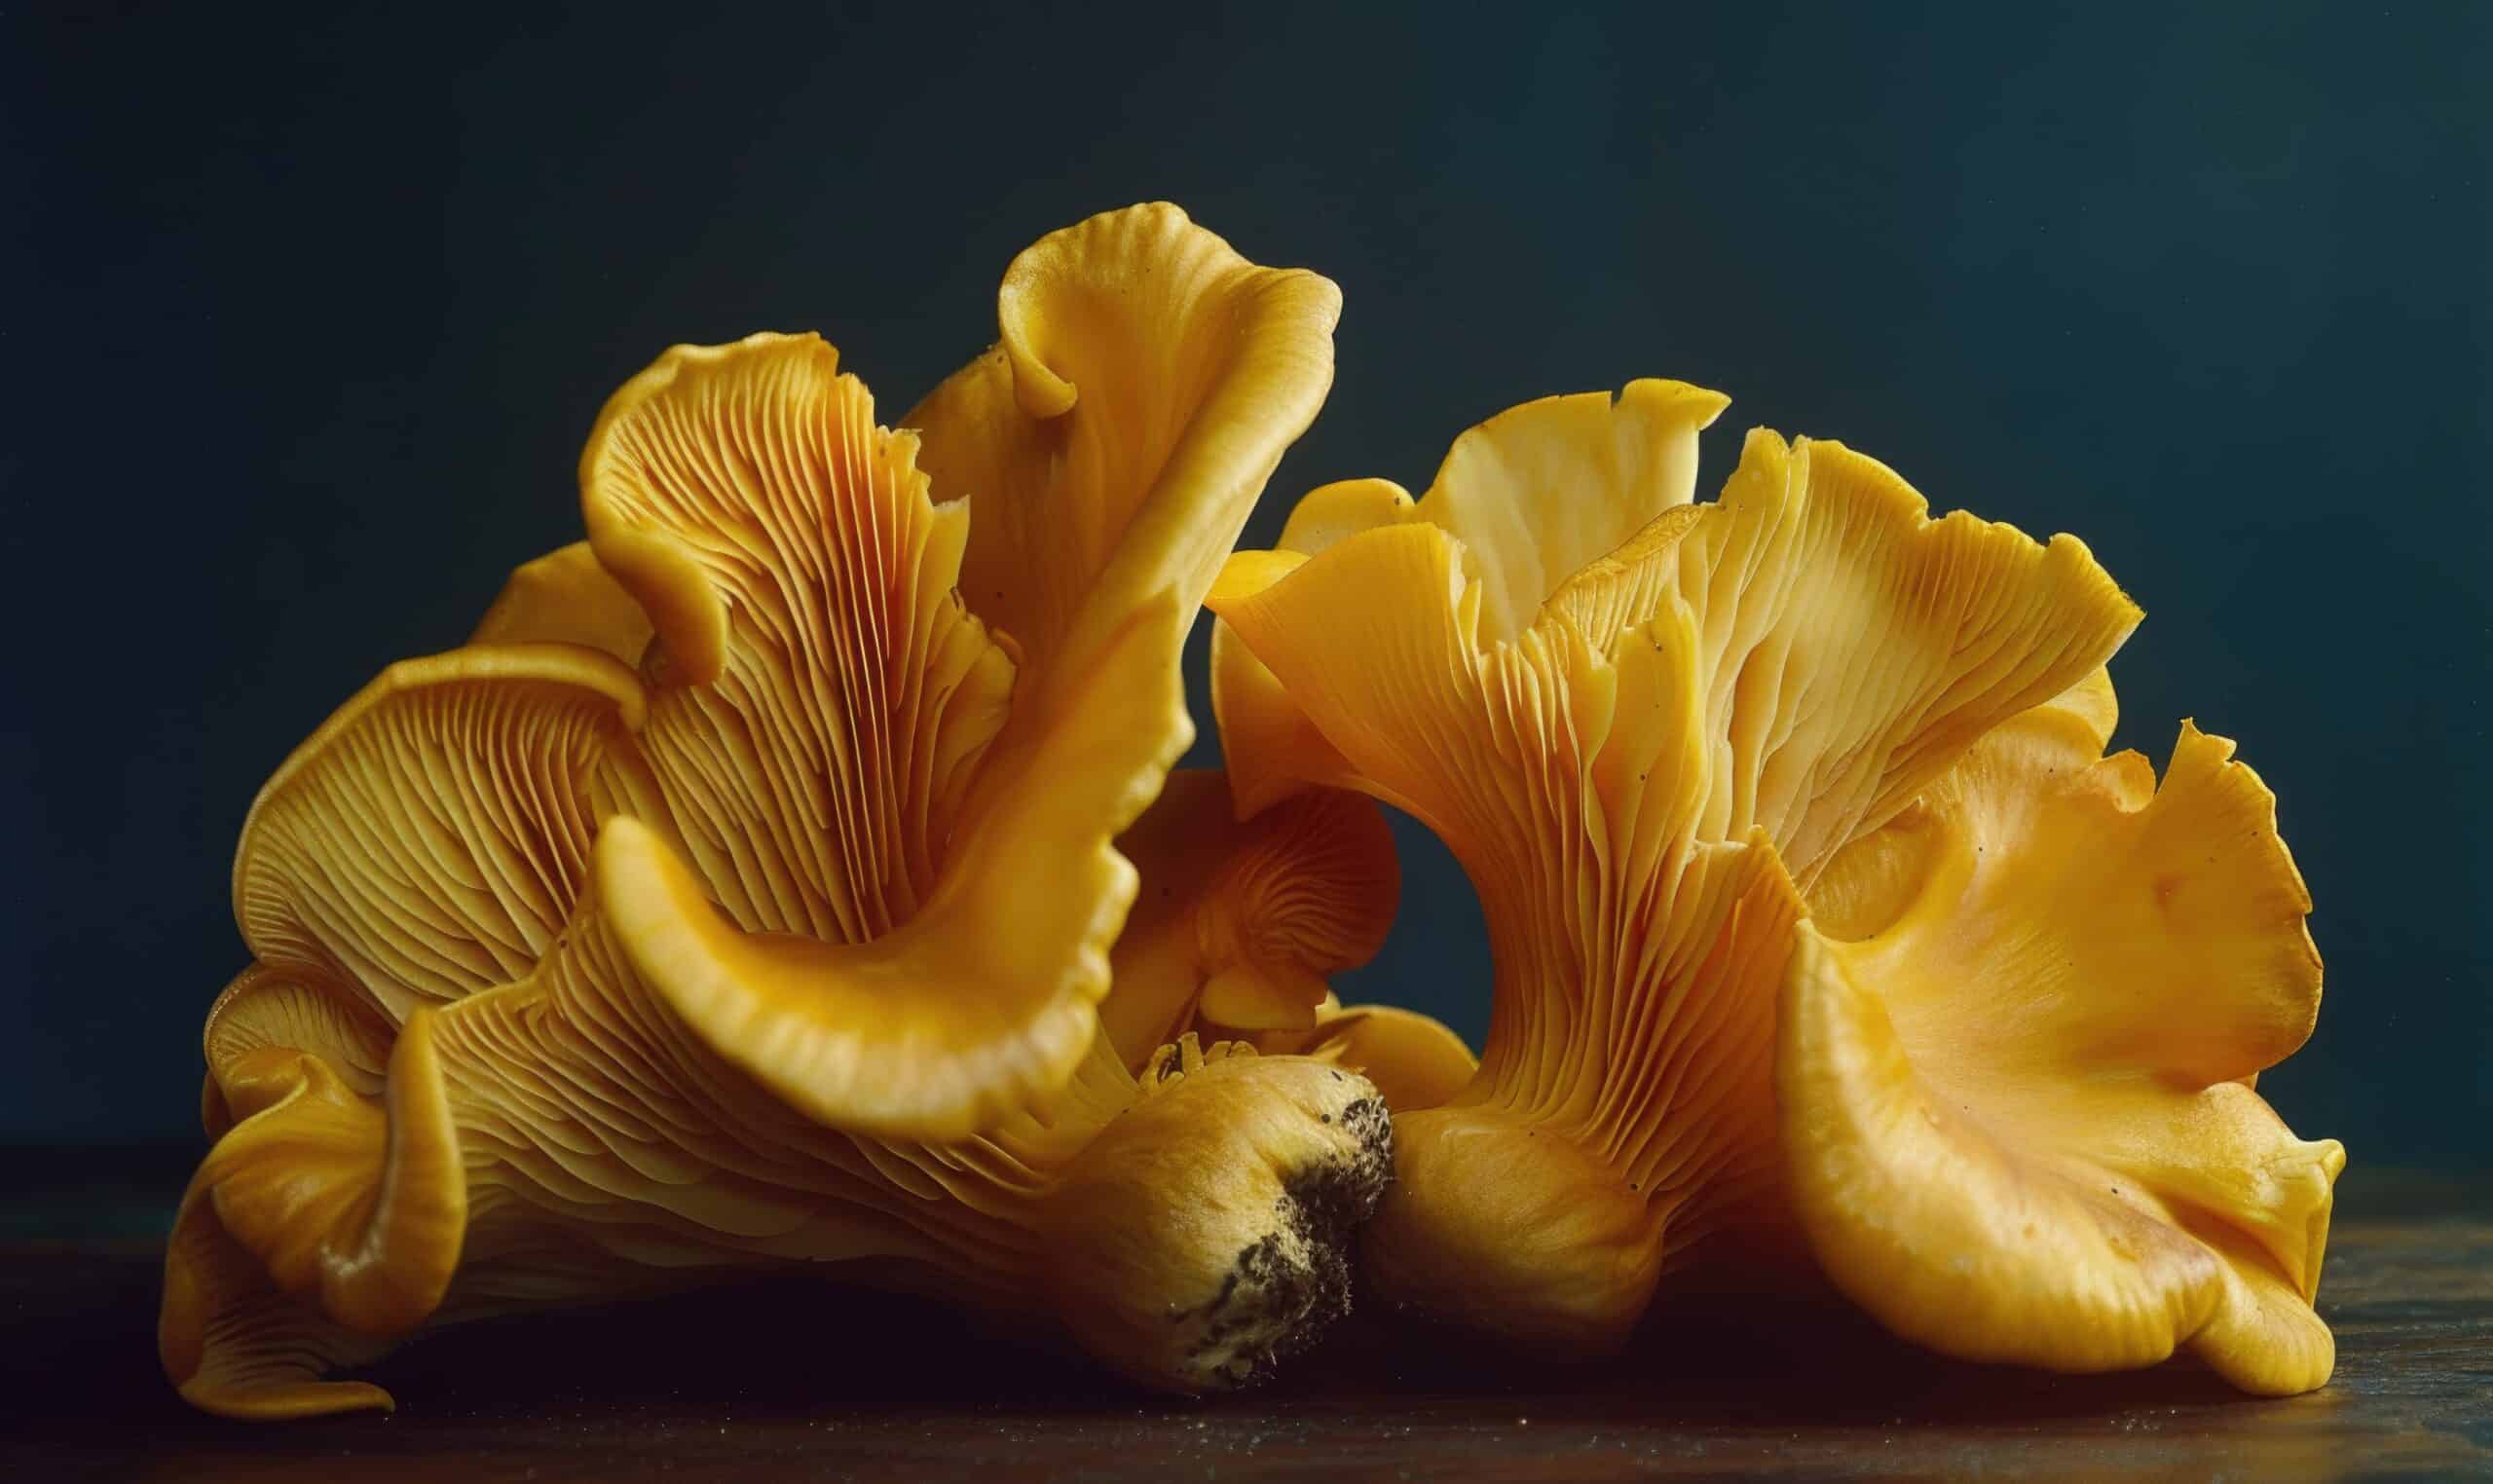 growmyownhealthfood.com : Are there any poisonous look-alikes for hen of the woods?